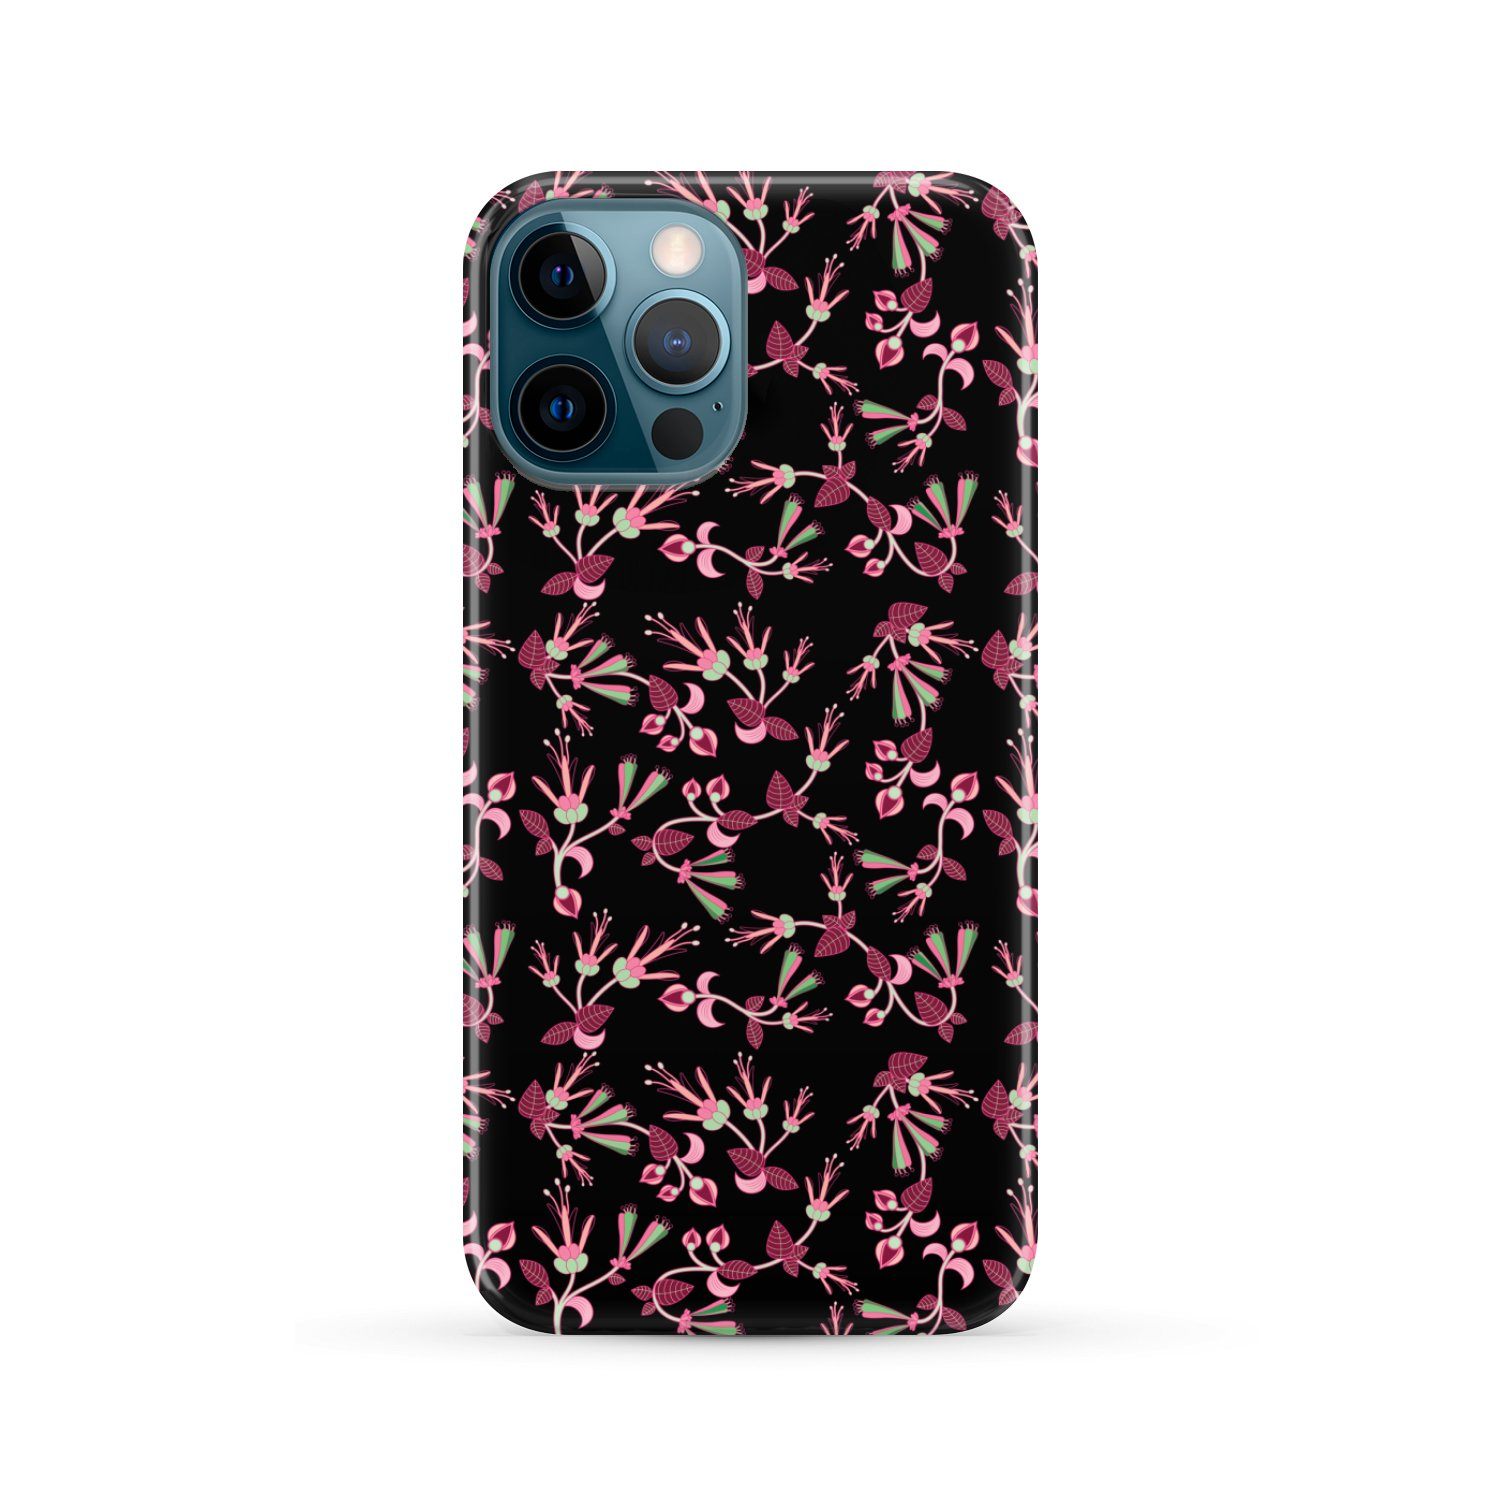 Floral Green Black Phone Case Phone Case wc-fulfillment iPhone 12 Pro Max 